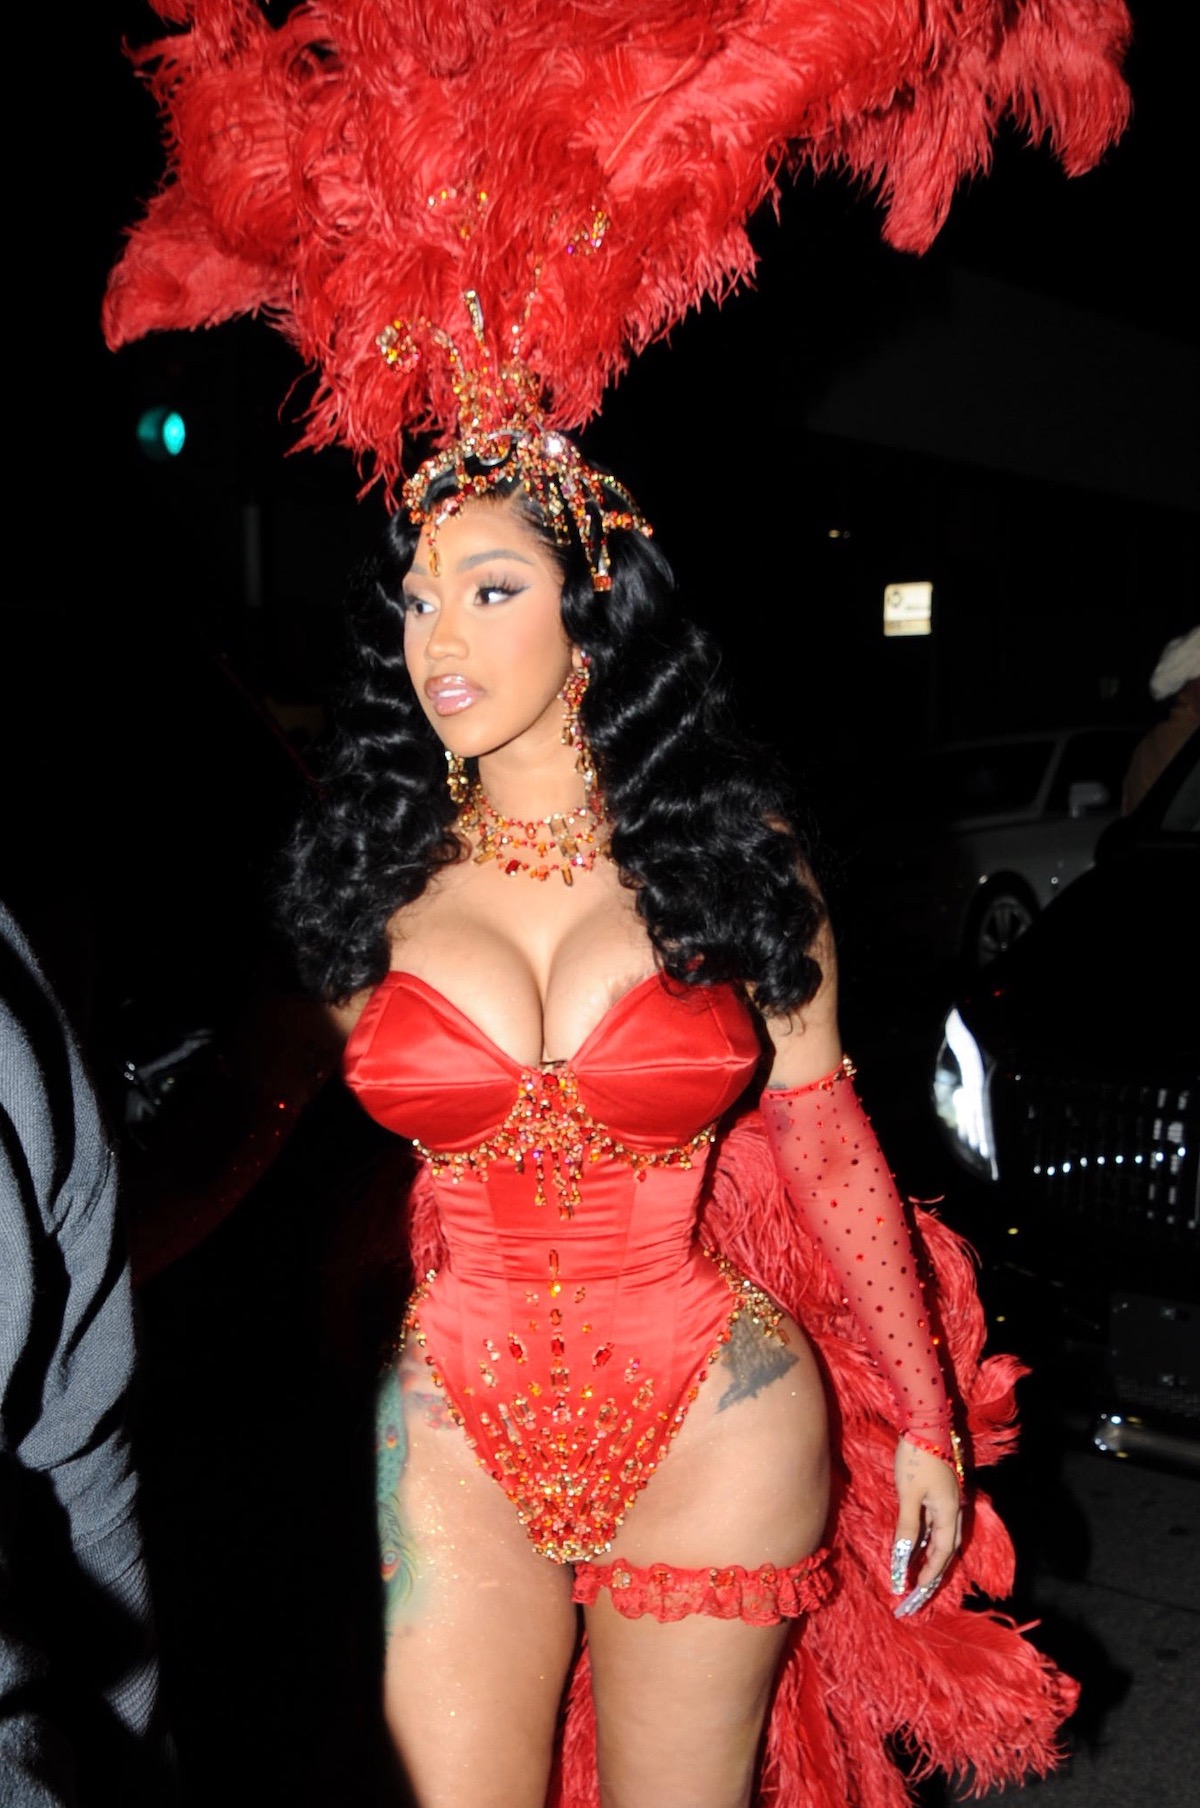 Cardi B and Offset attend her Los Angeles Birthday Party